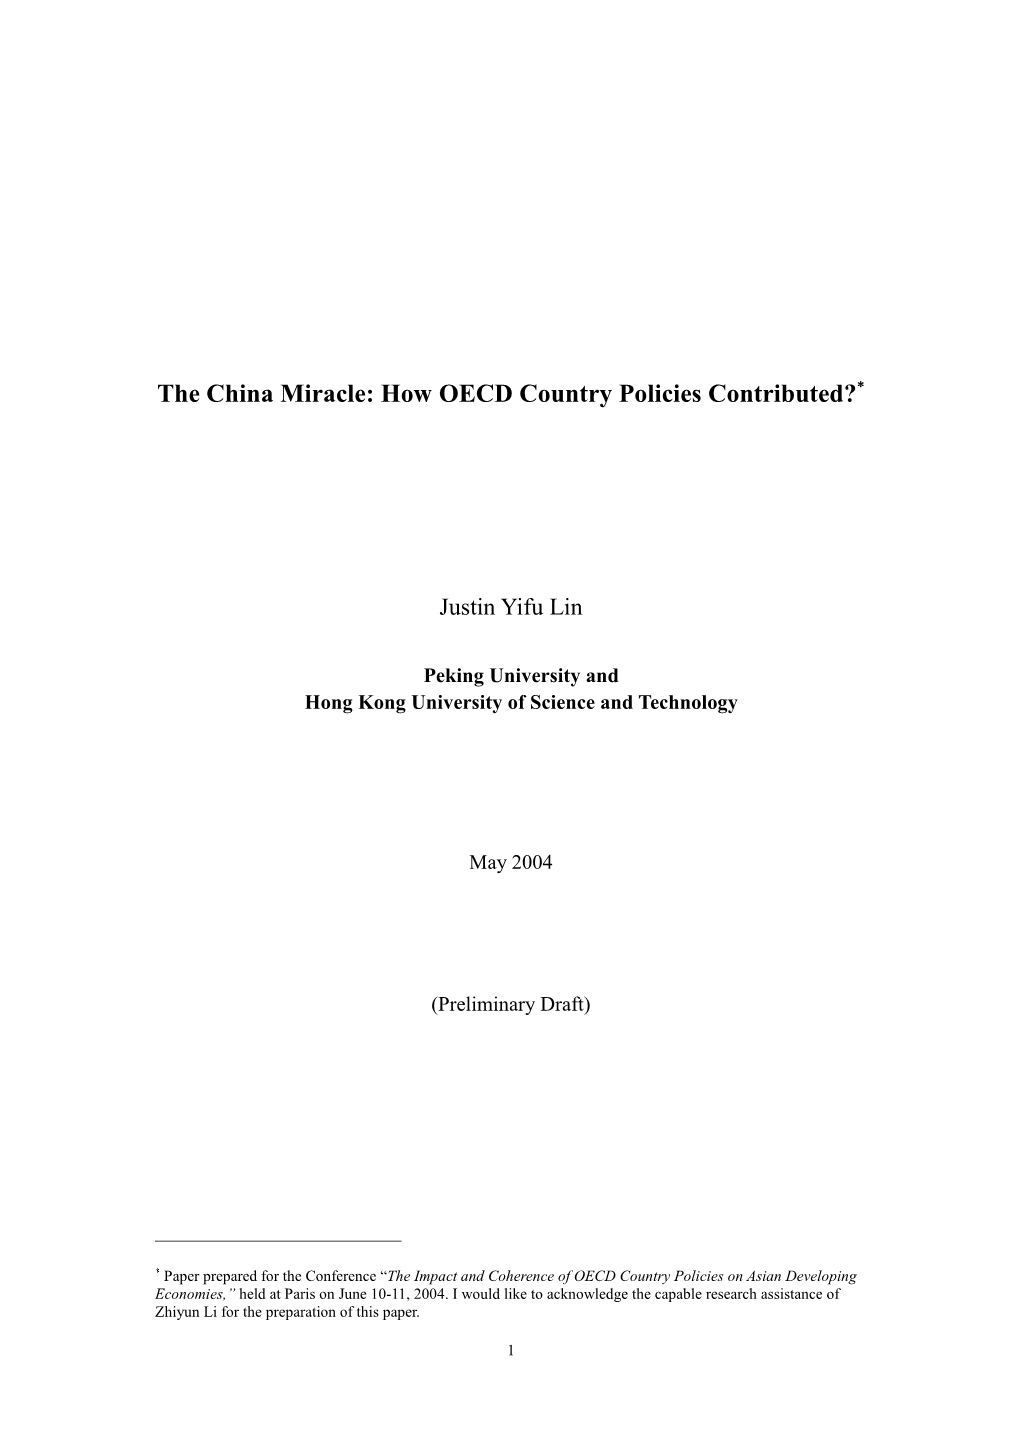 The China Miracle: How OECD Country Policies Contributed?